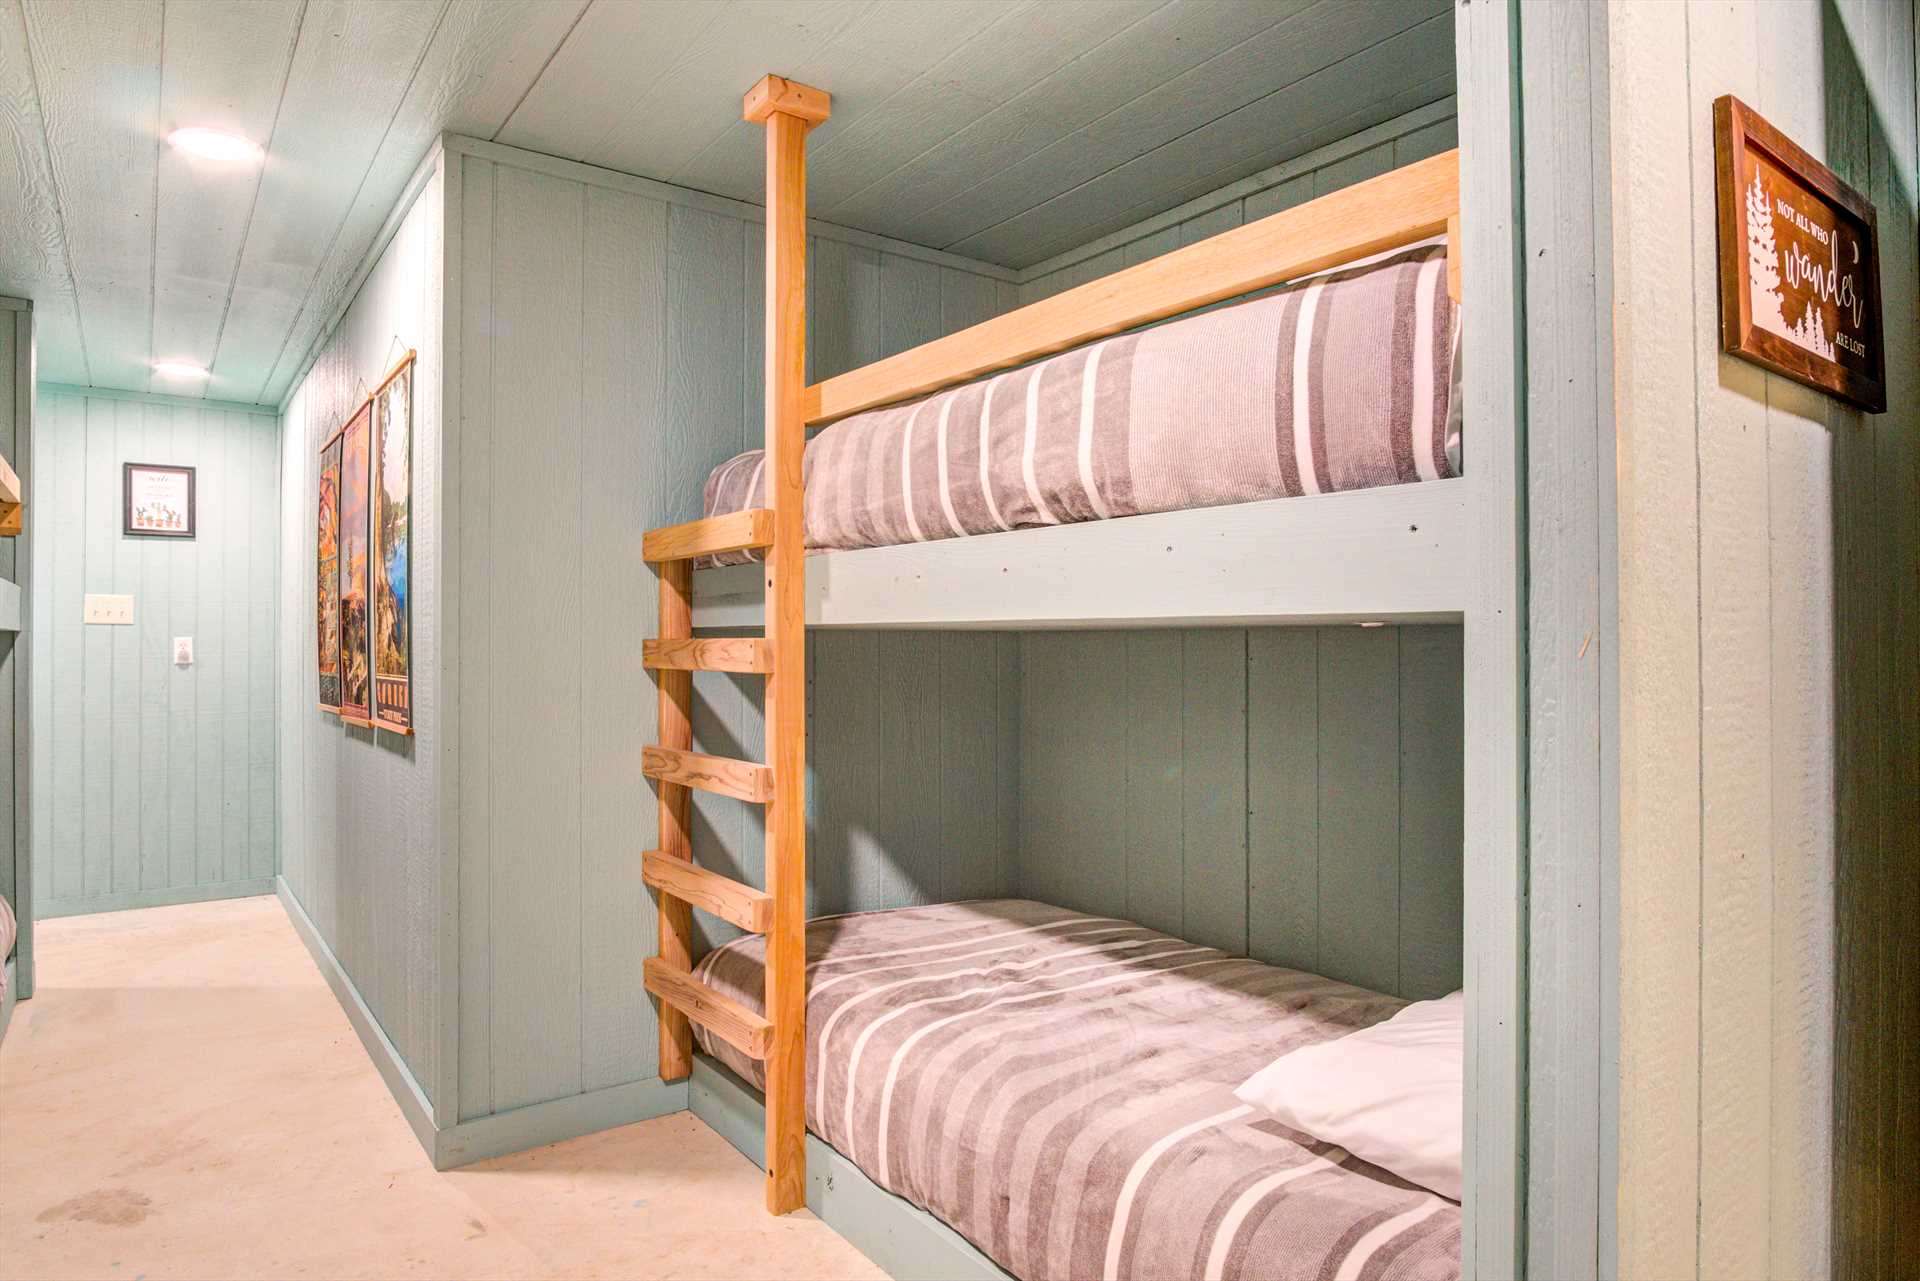                                                 Overall, Roadrunner Canyon Ranch has sleeping accommodations for up to ten people, and all beds are draped in clean and comfortable linens.